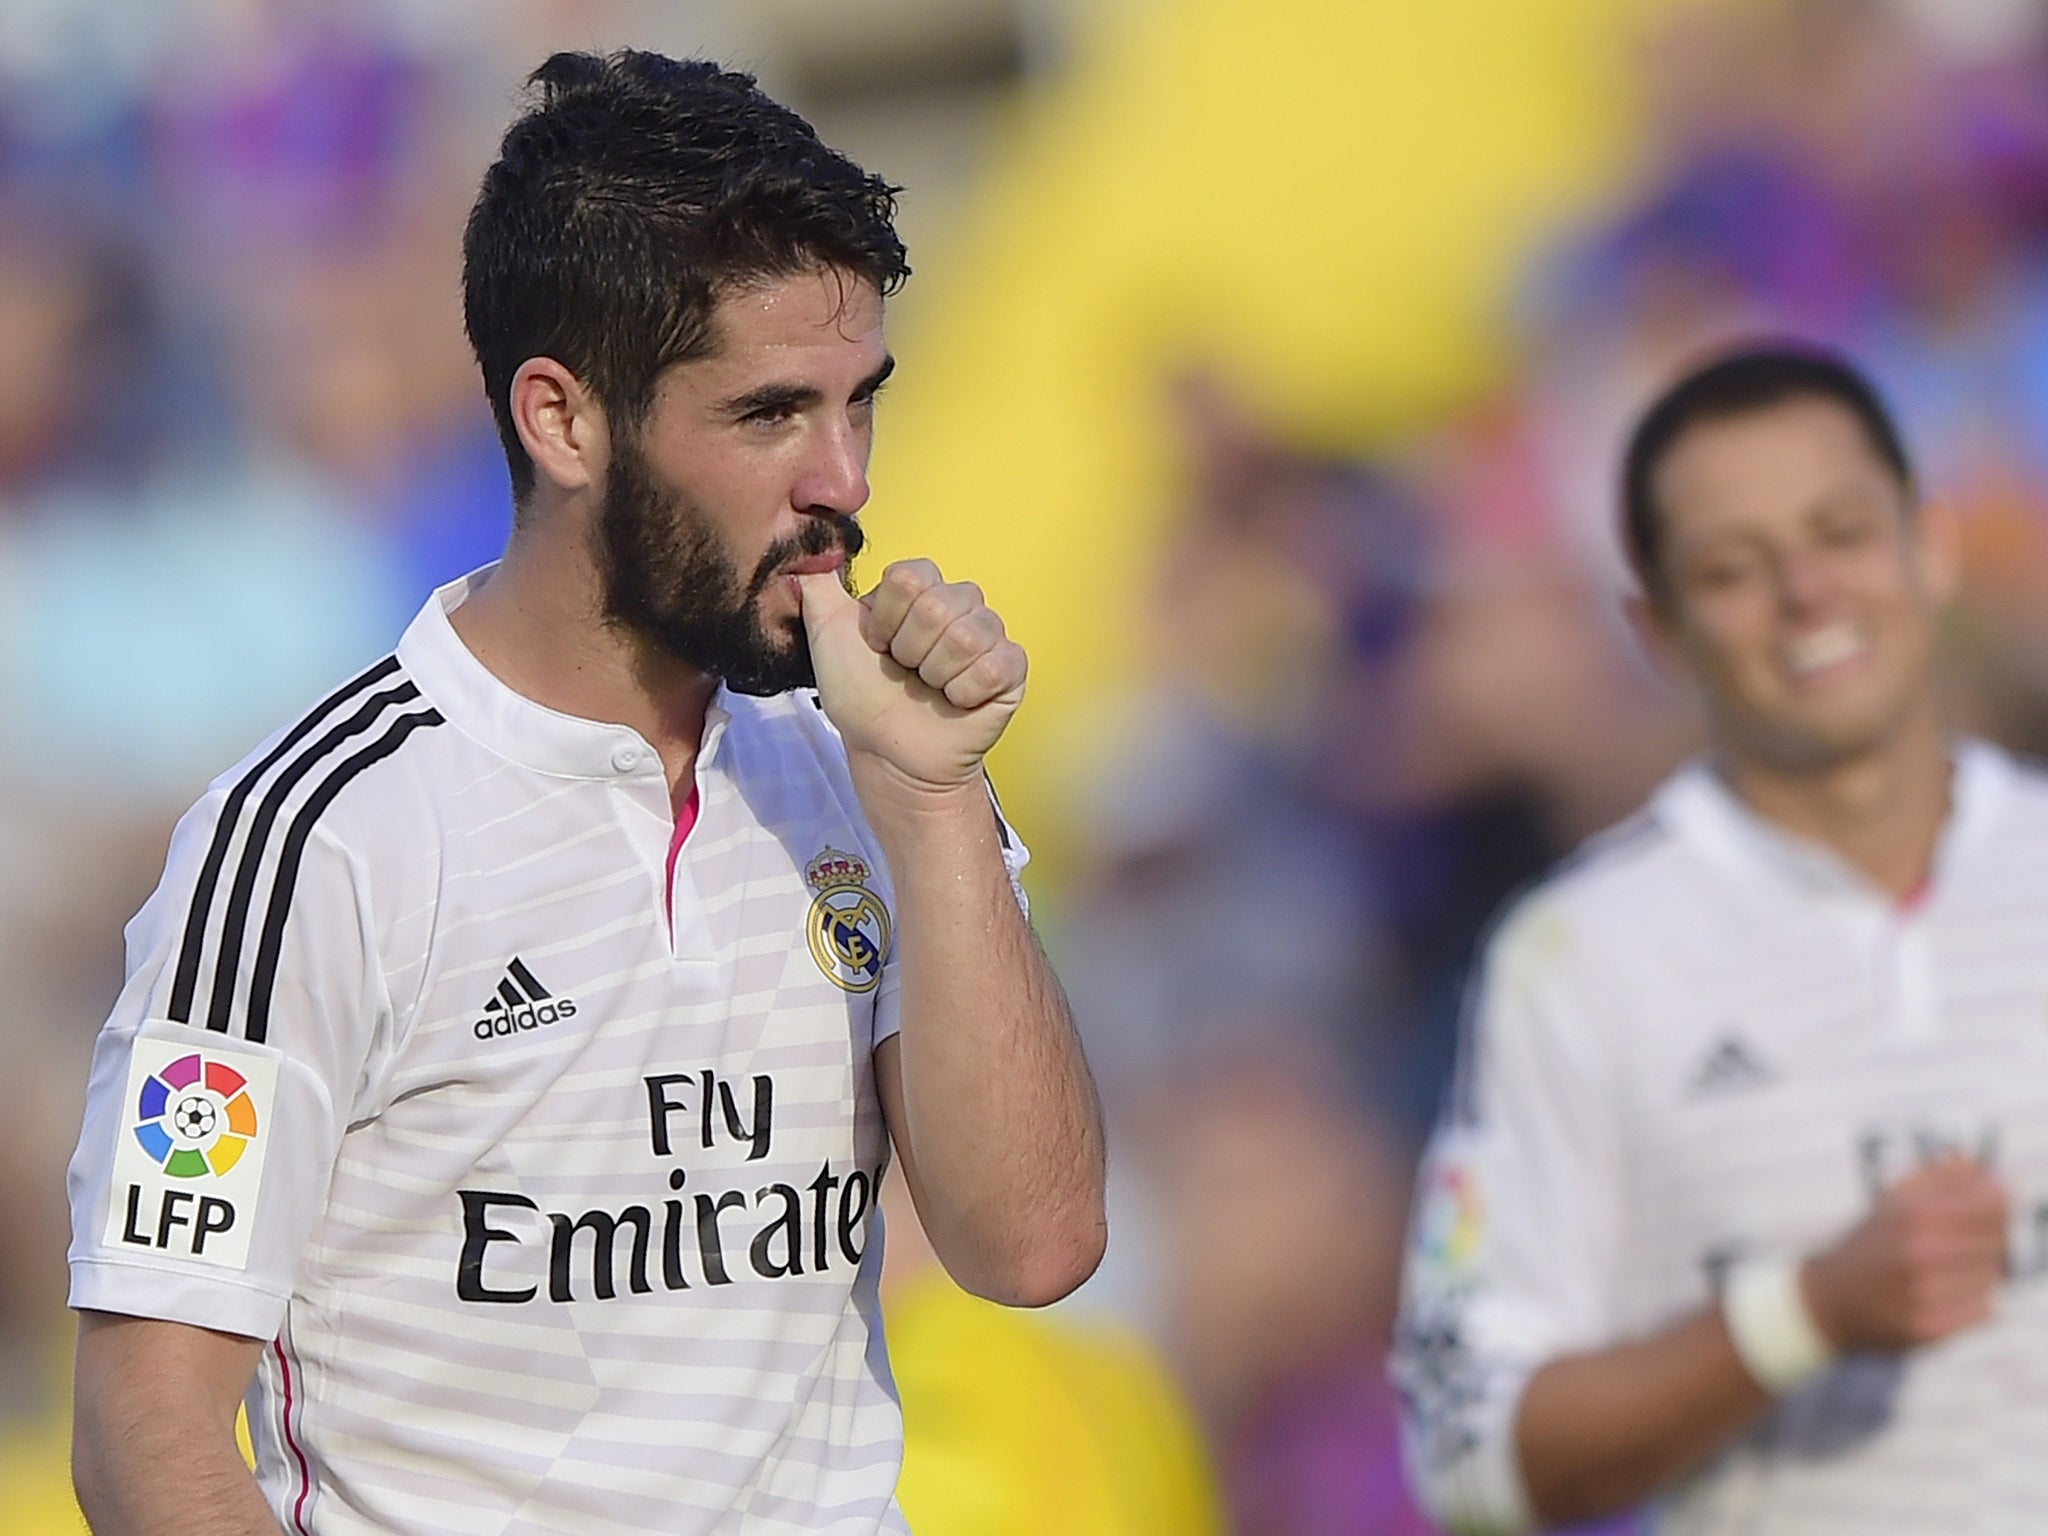 Isco in action for Real Madrid